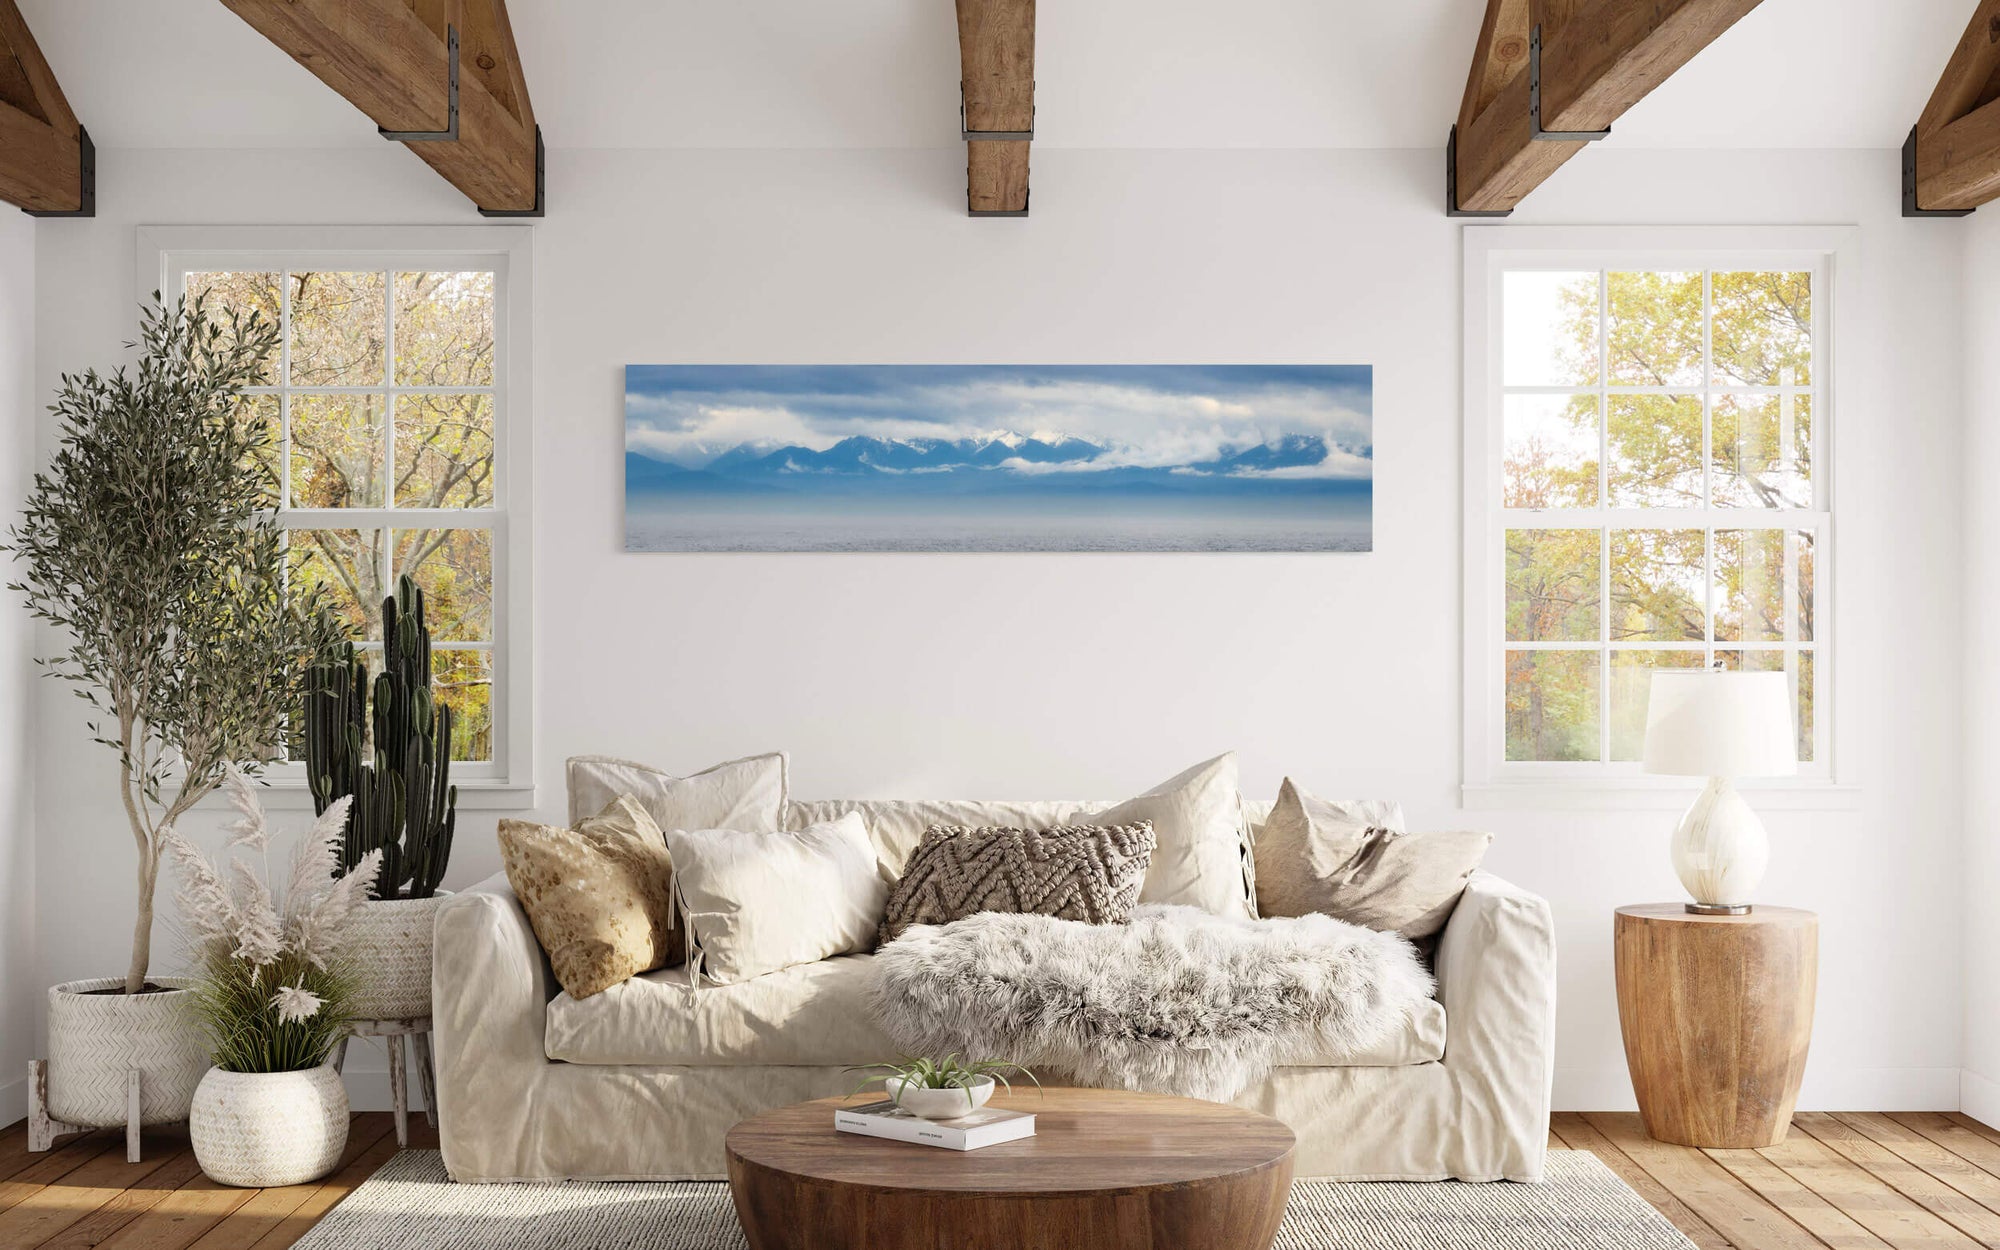 An Olympic Mountains panorama photograph hangs in a living room.